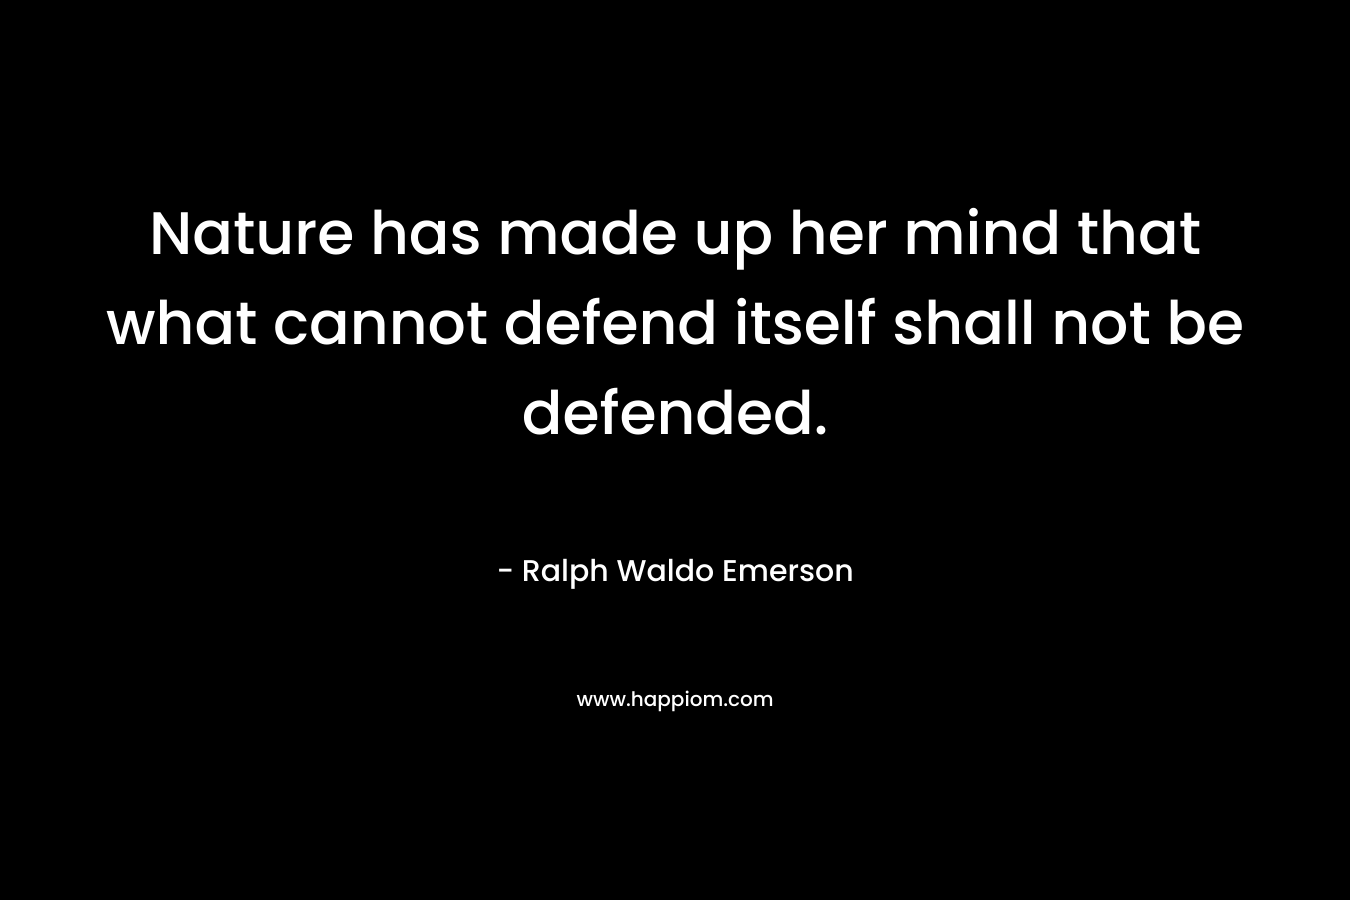 Nature has made up her mind that what cannot defend itself shall not be defended.